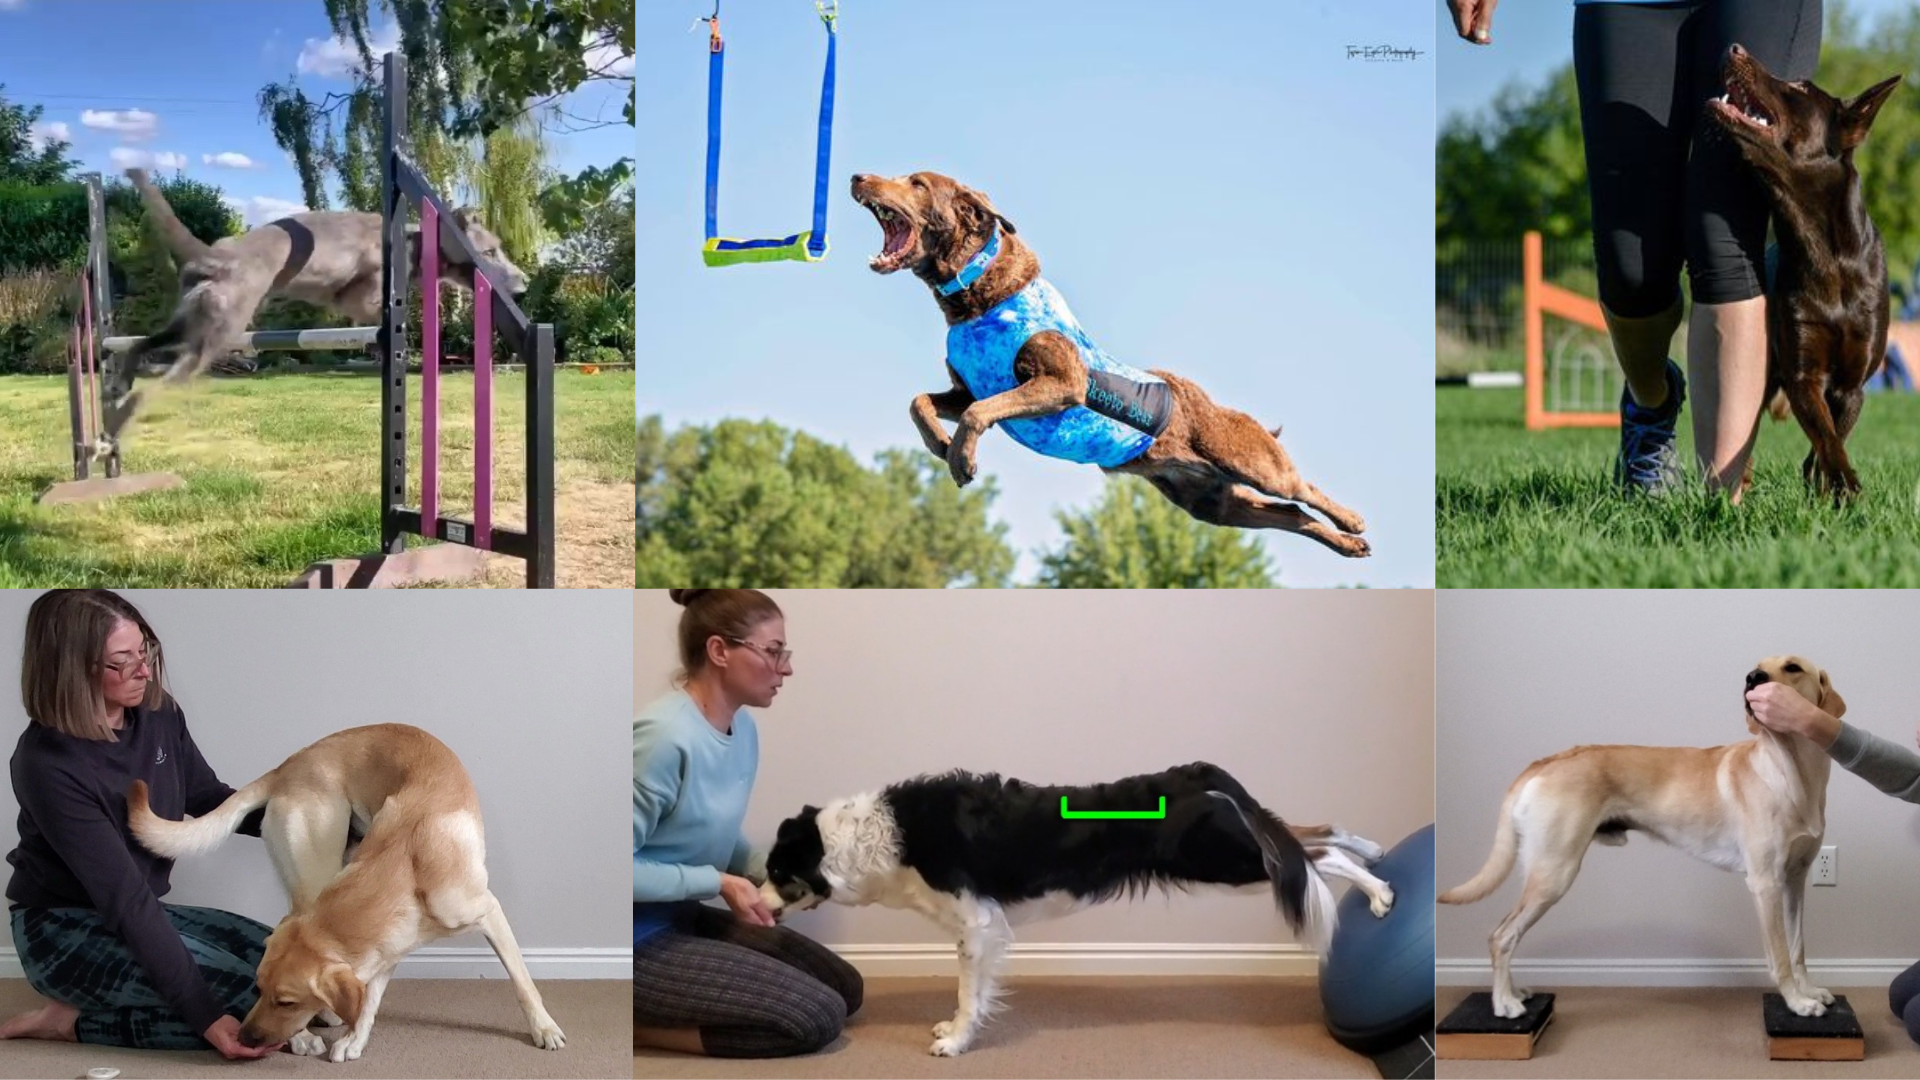 Several photos of dogs participating in sport activities, and analogous exercises that follow the SAID Principle.